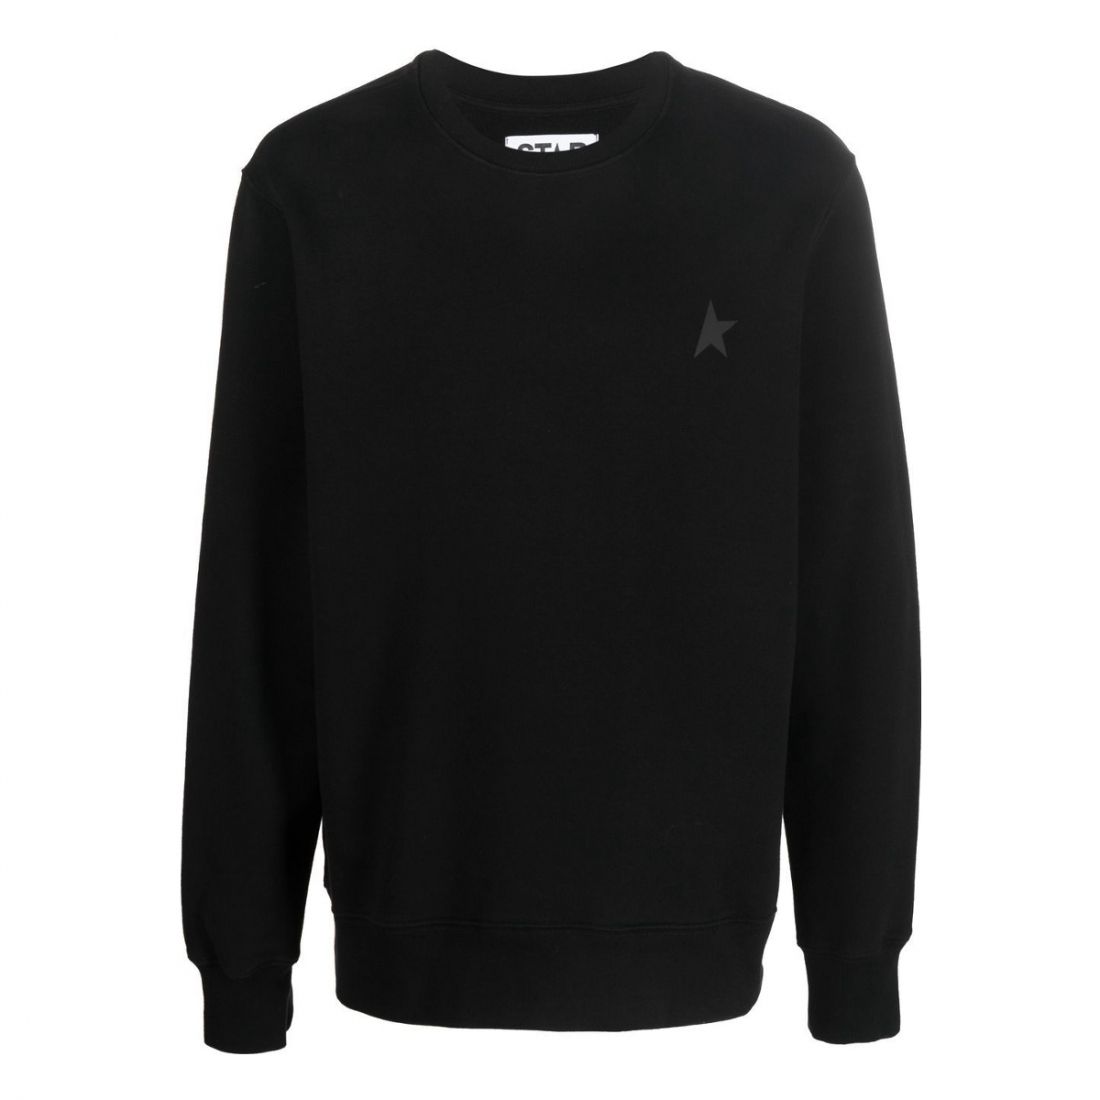 Golden Goose Deluxe Brand - Pull 'One Star' pour Hommes